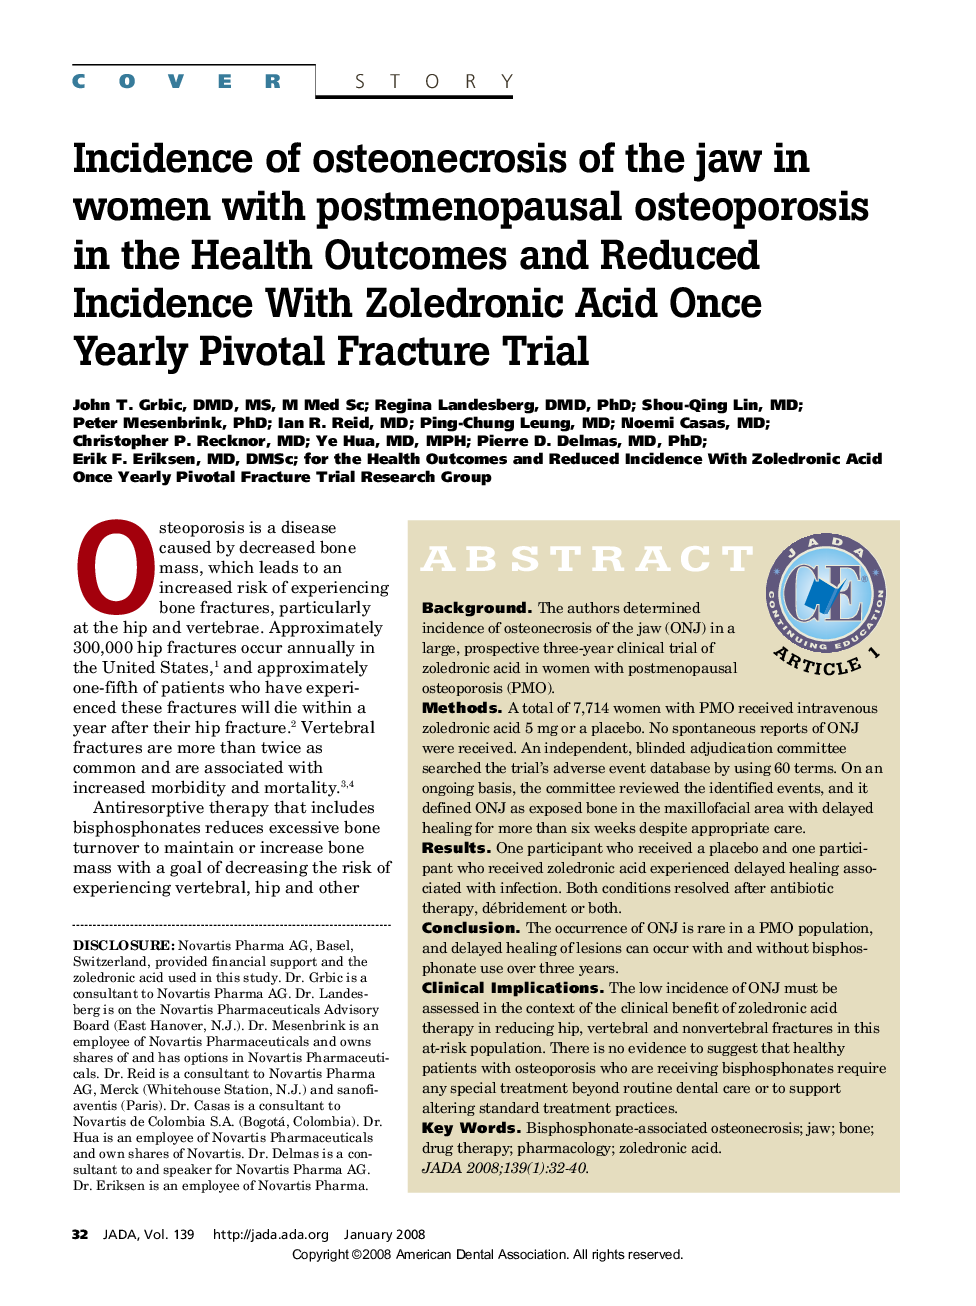 Incidence of Osteonecrosis of the Jaw in Women With Postmenopausal Osteoporosis in the Health Outcomes and Reduced Incidence With Zoledronic Acid Once Yearly Pivotal Fracture Trial 